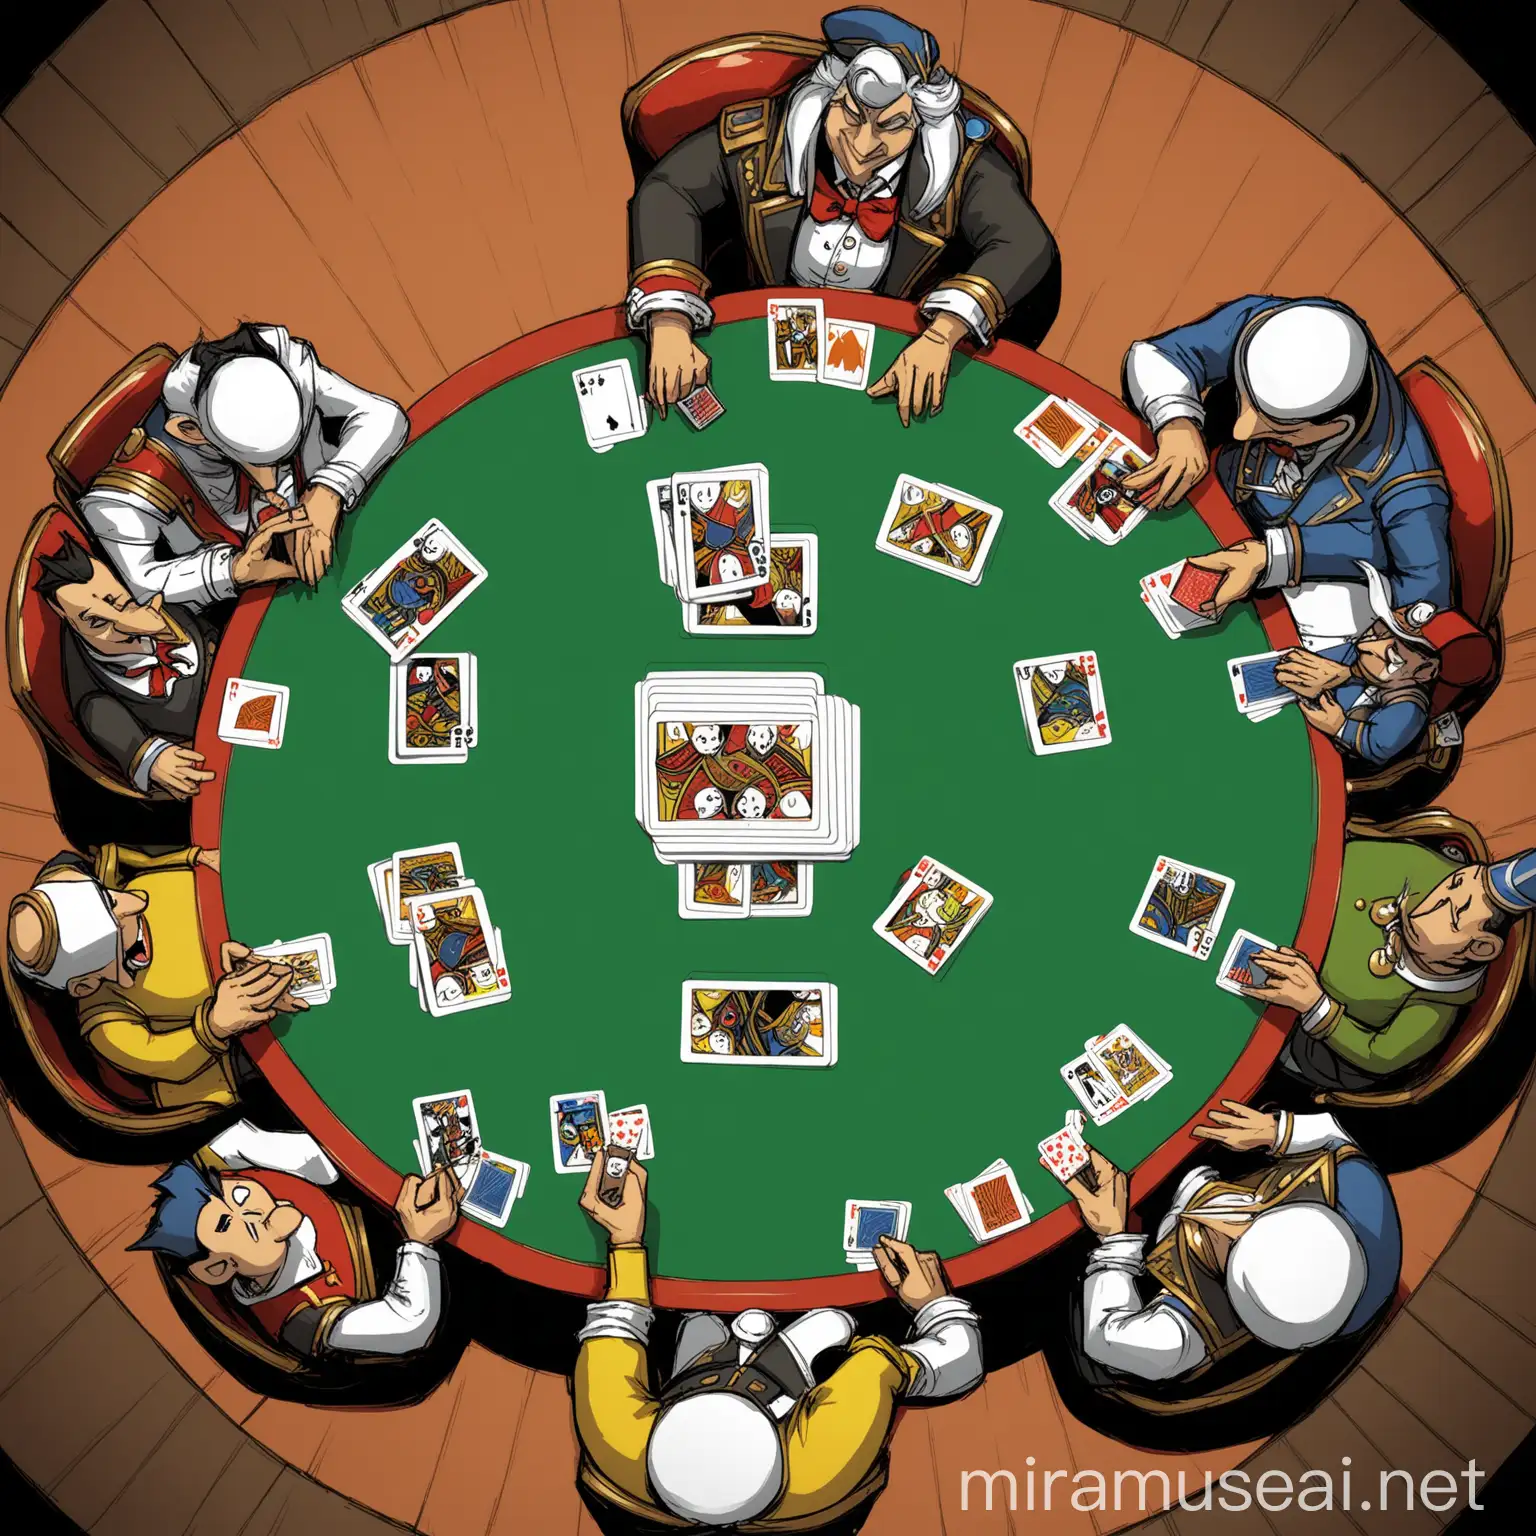 Cartoon Characters Playing Card Game at Table